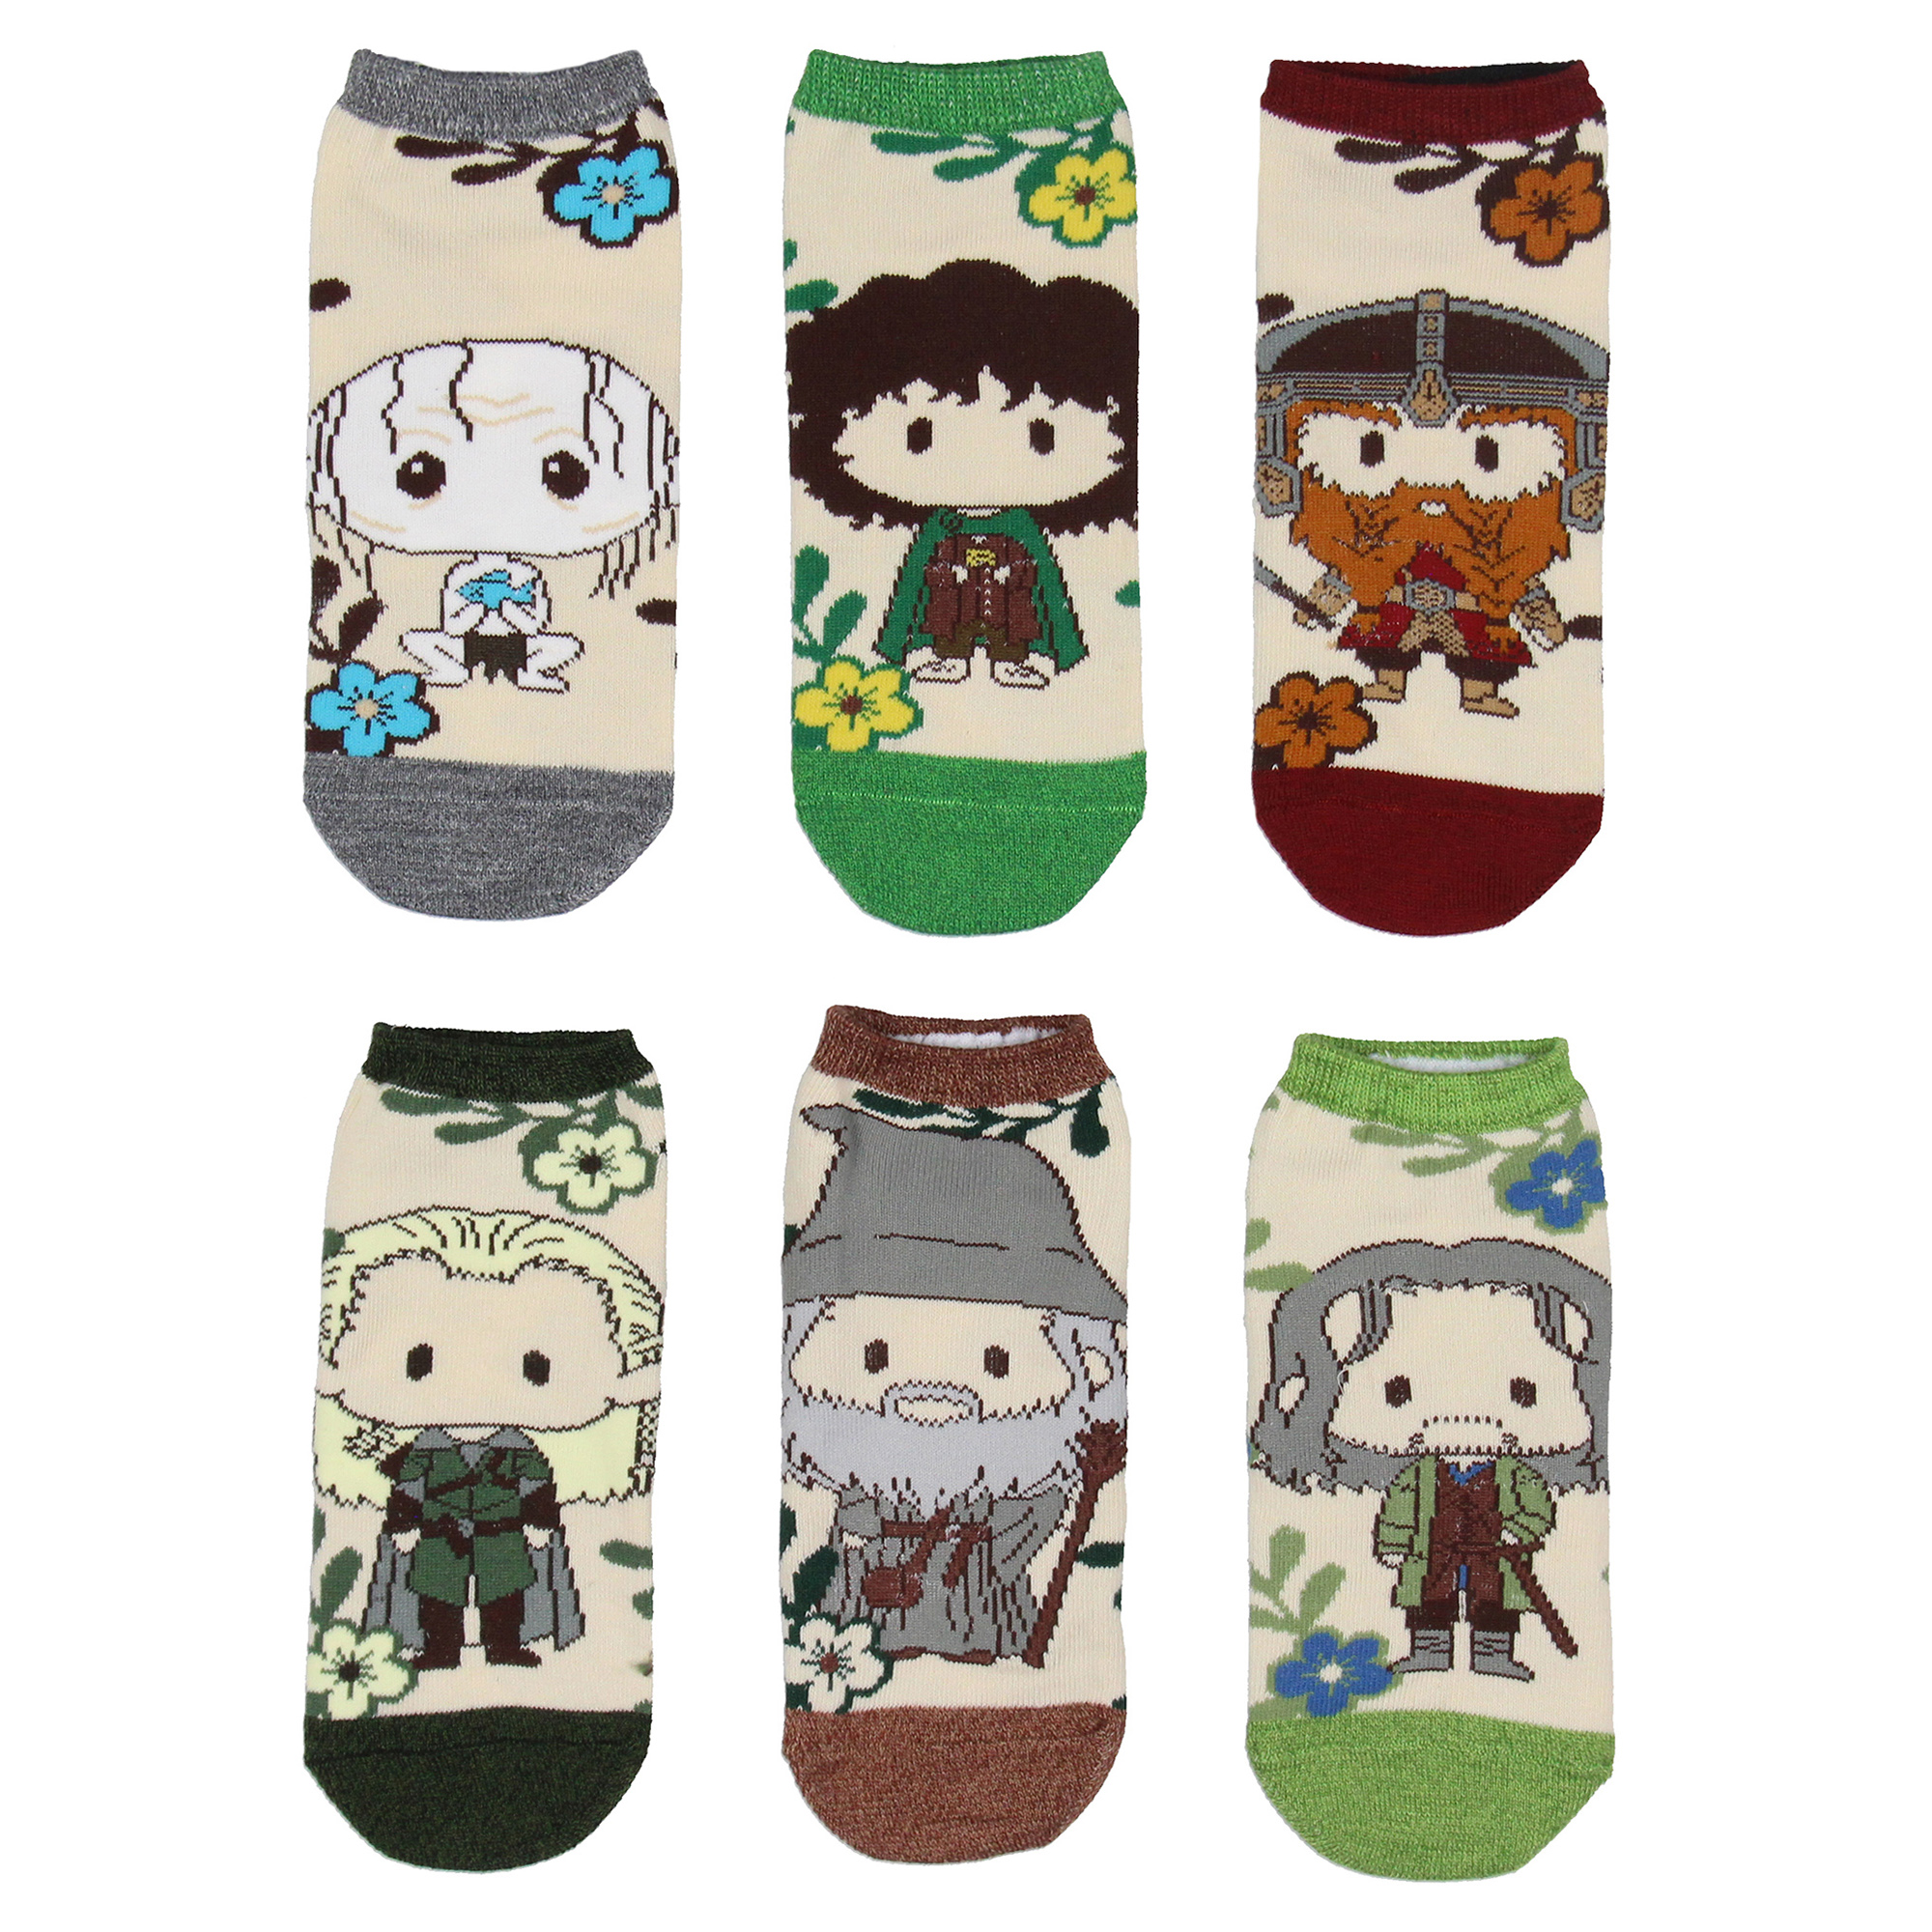 Bioworld The Lord Of The Rings Socks Adult Character Earth Tones Low Cut Now Show Mix And Match Ankle Socks 6 Pairs